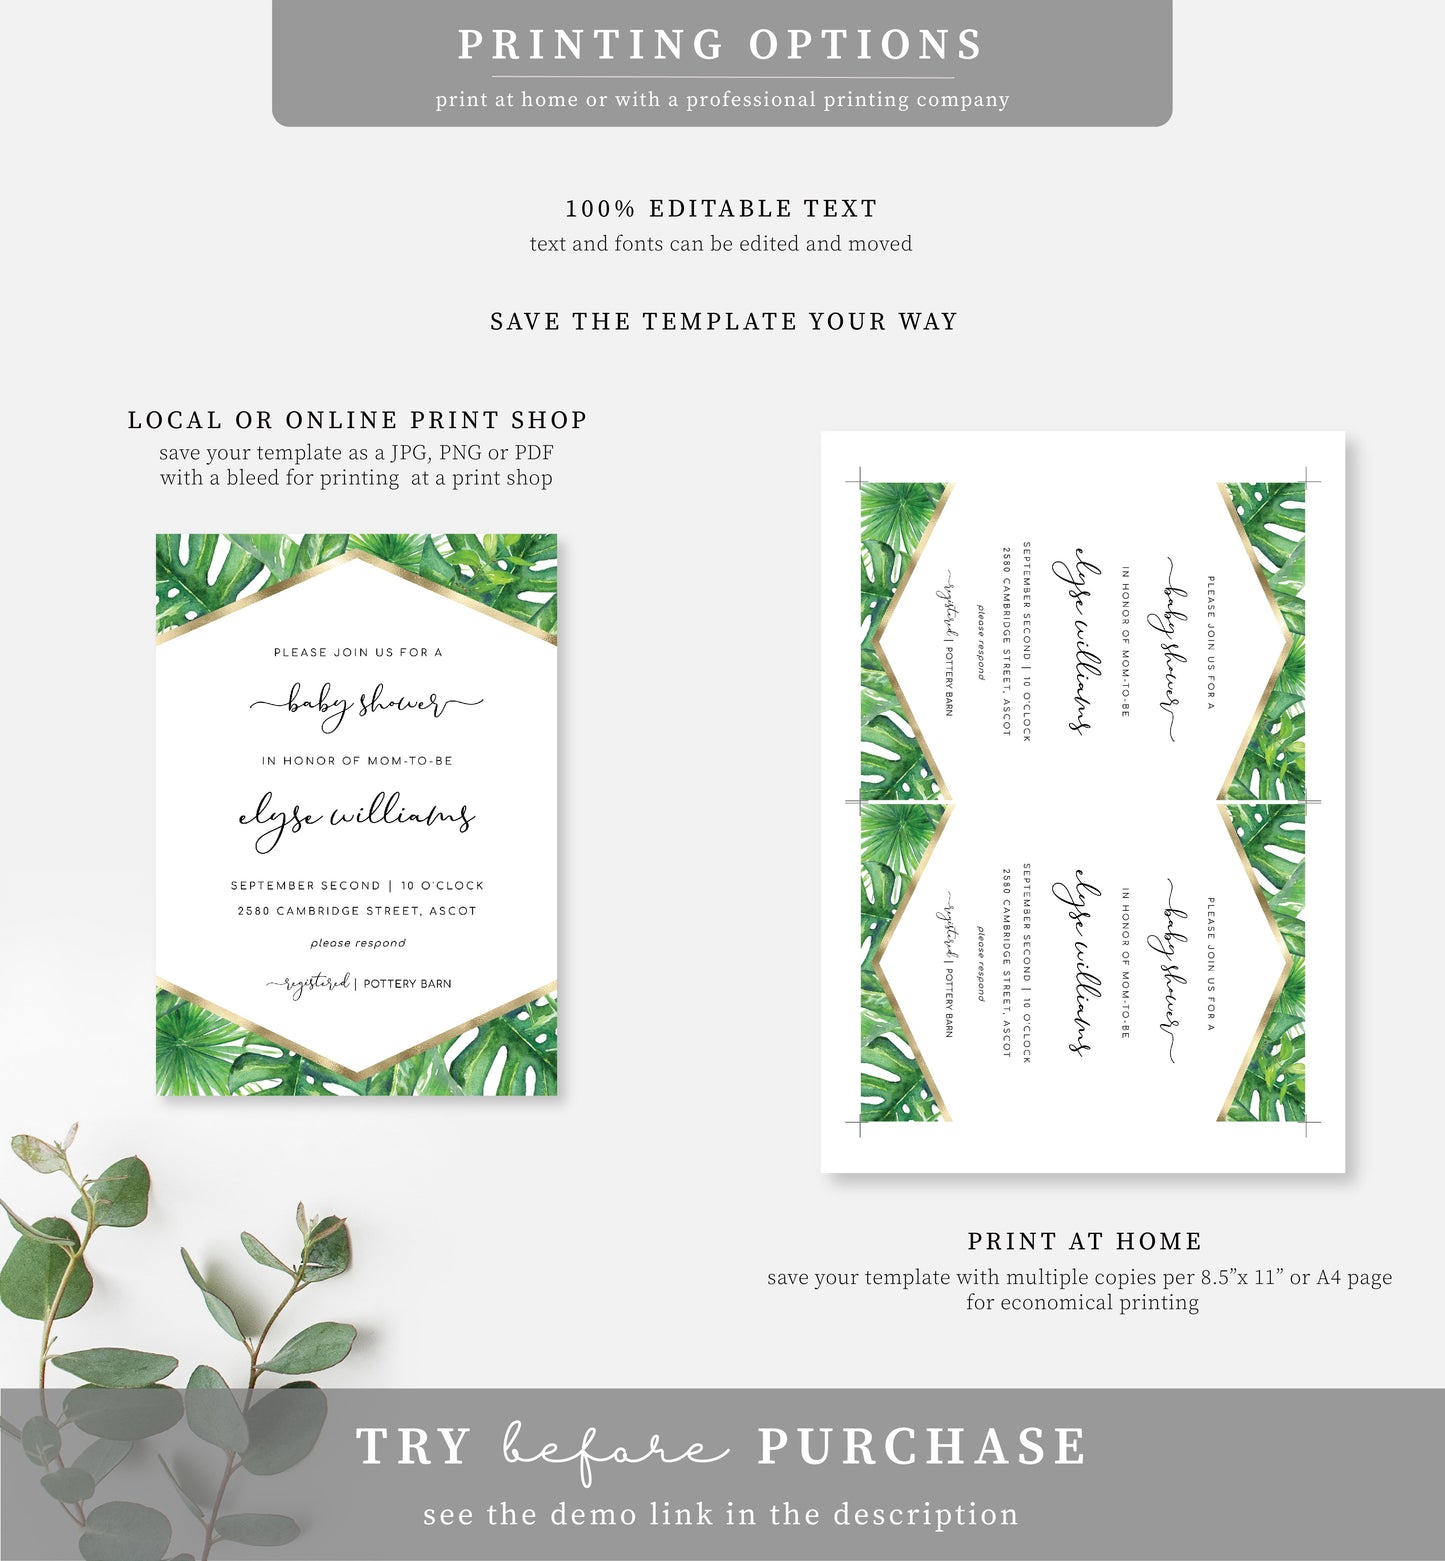 Aloha Palm Green | Printable Baby Shower Invitation Suite Template